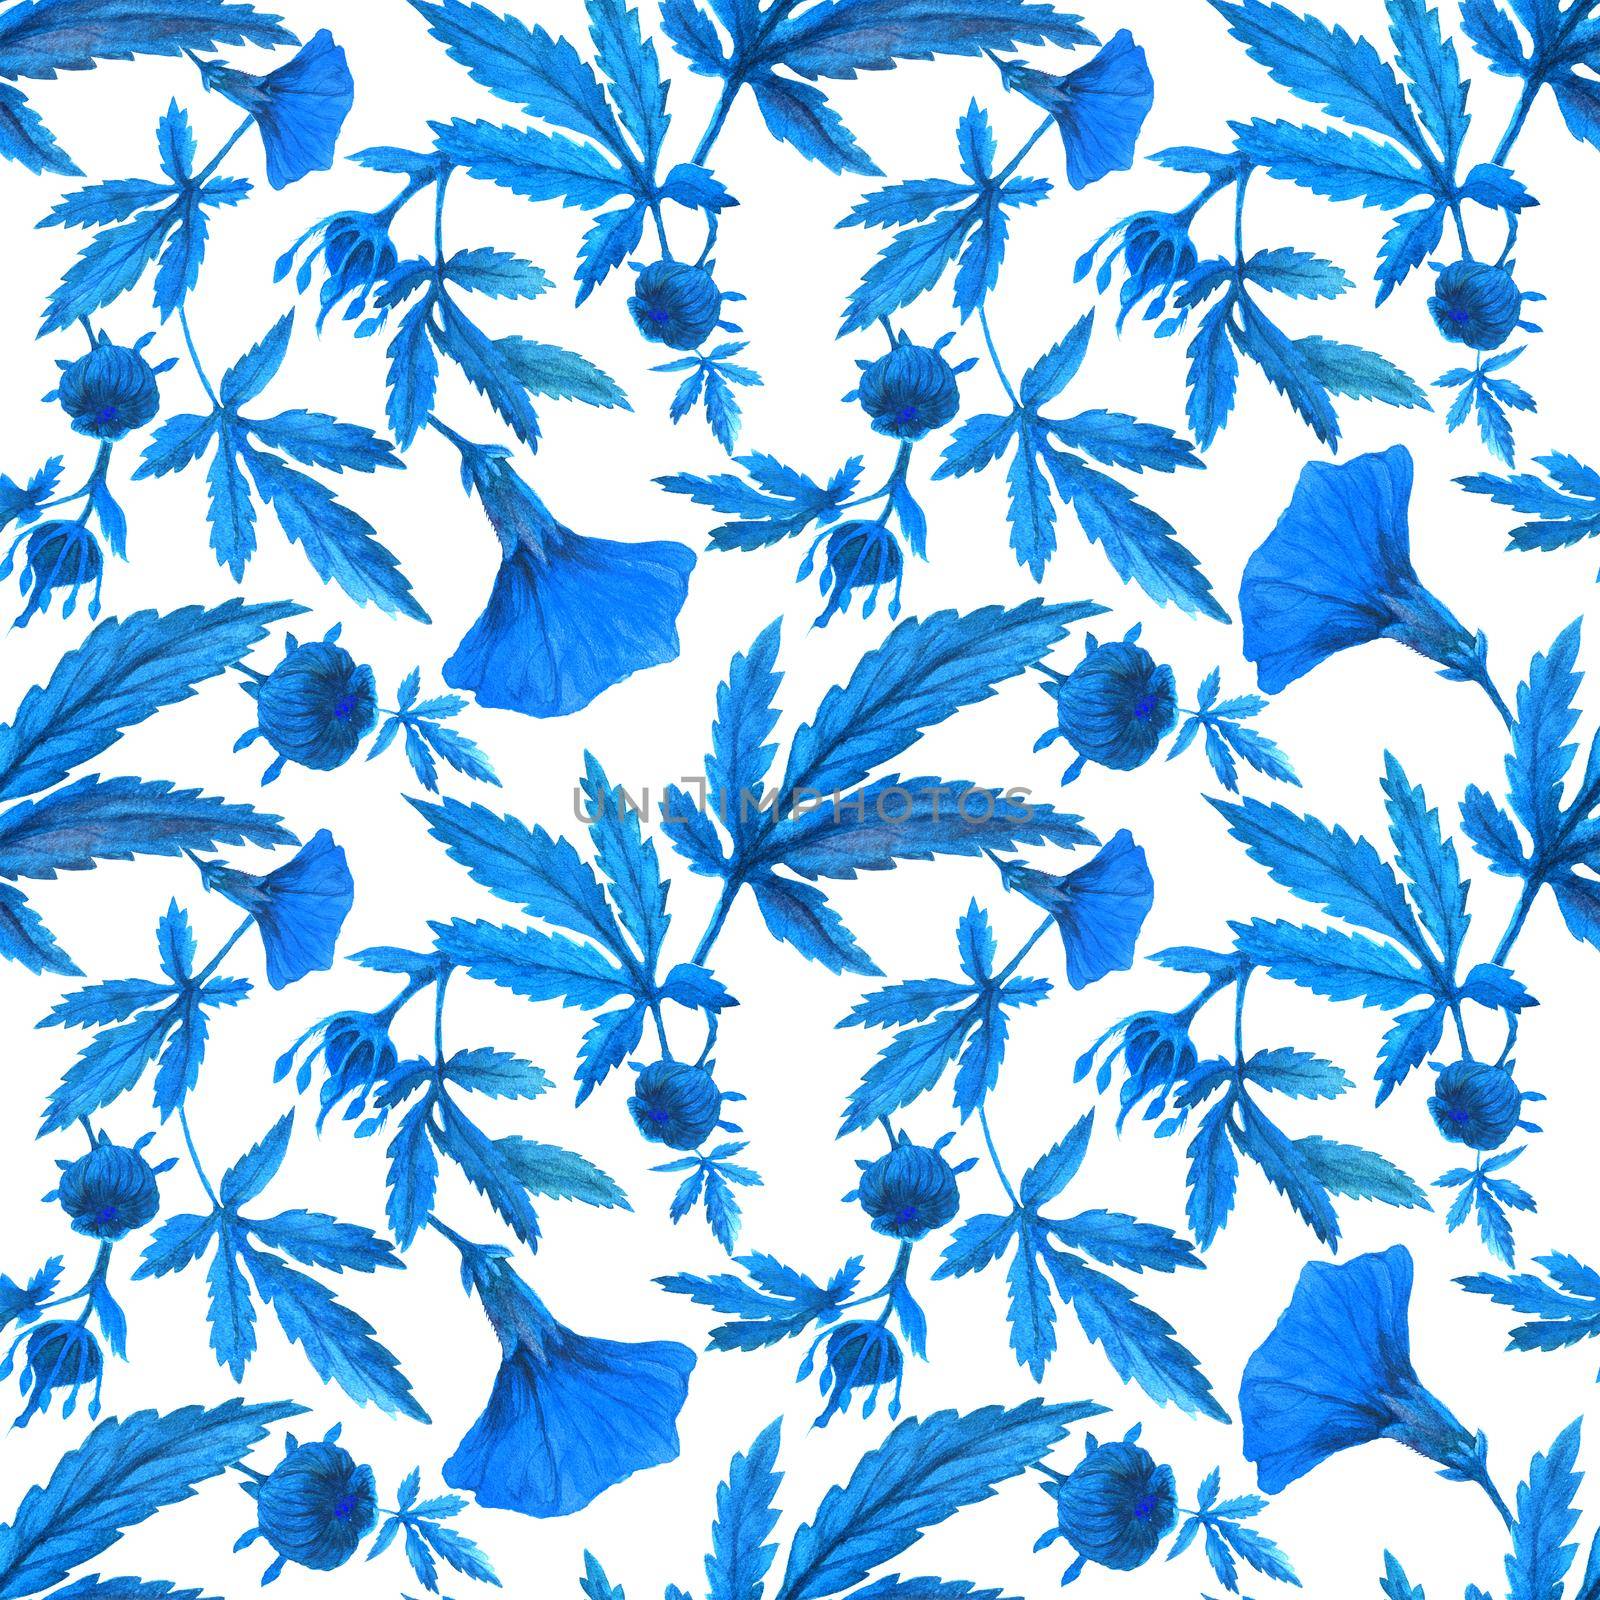 Watercolor cranberry hibiscus garden blue pattern. Flowers and buds on a branch. by Xeniasnowstorm